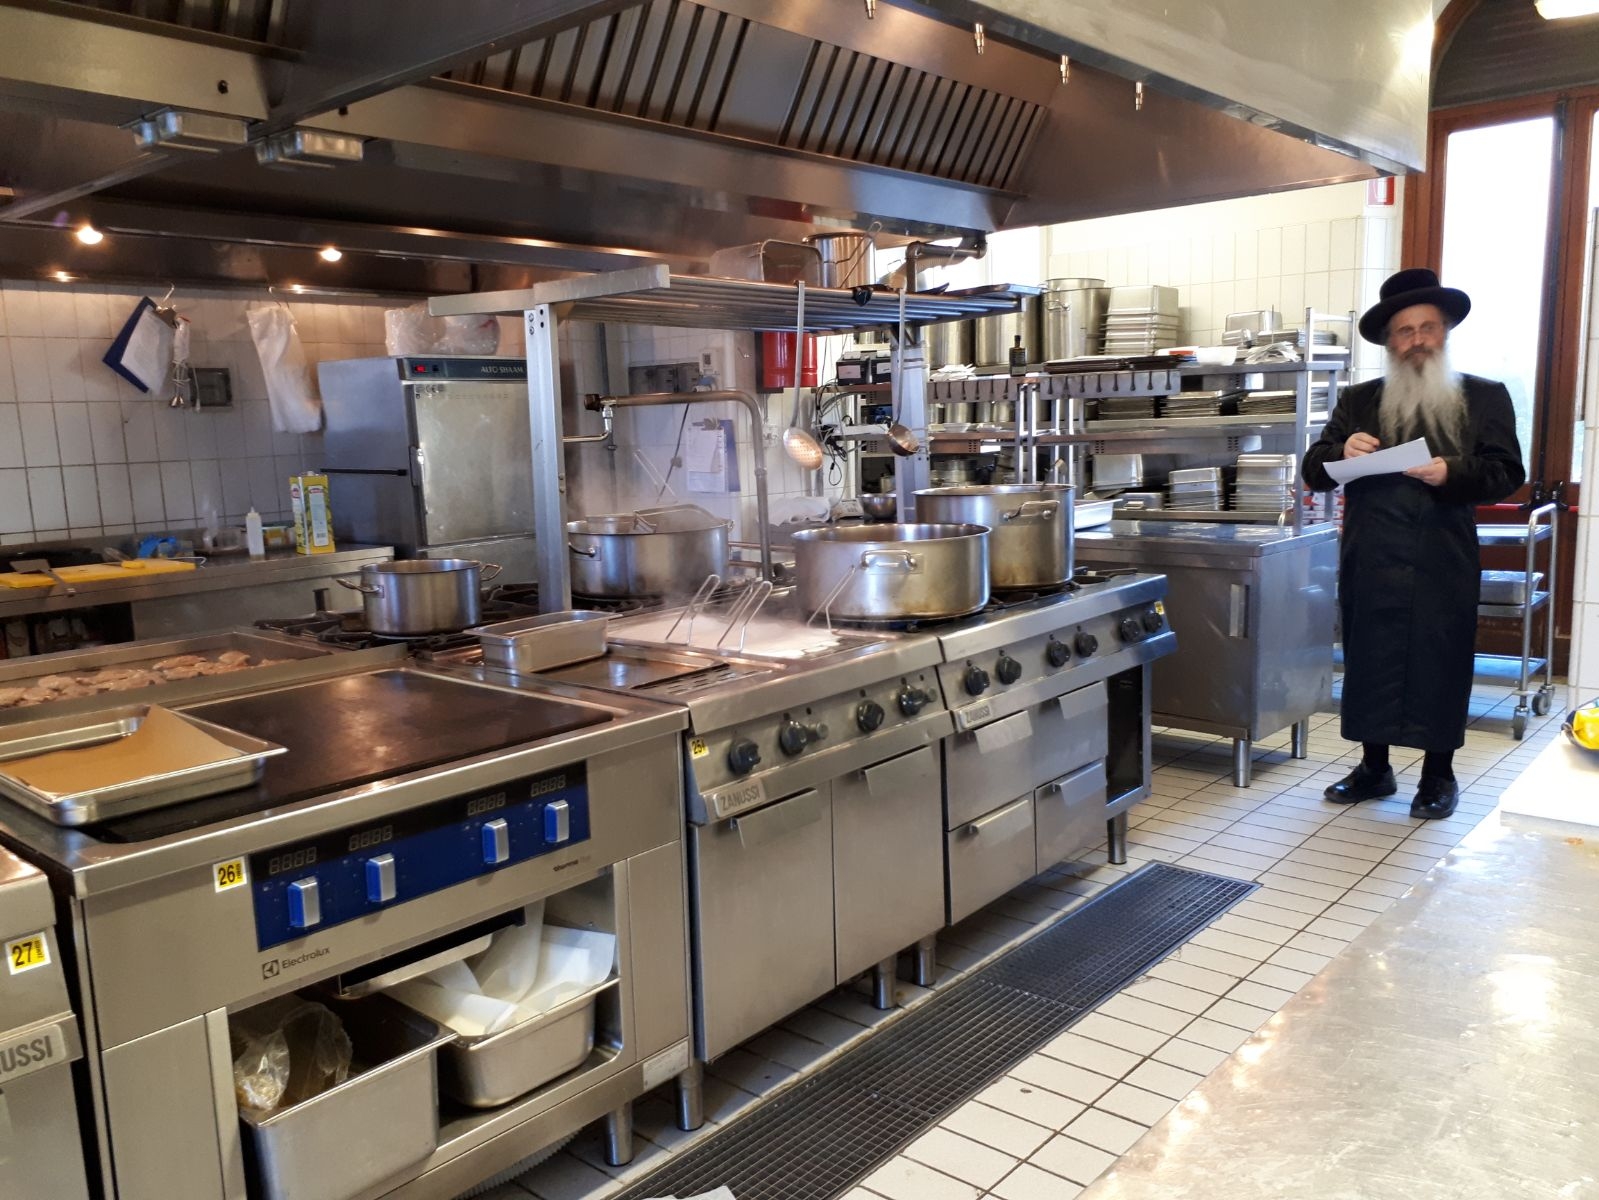 Inspection of hotel kitchen for Passover